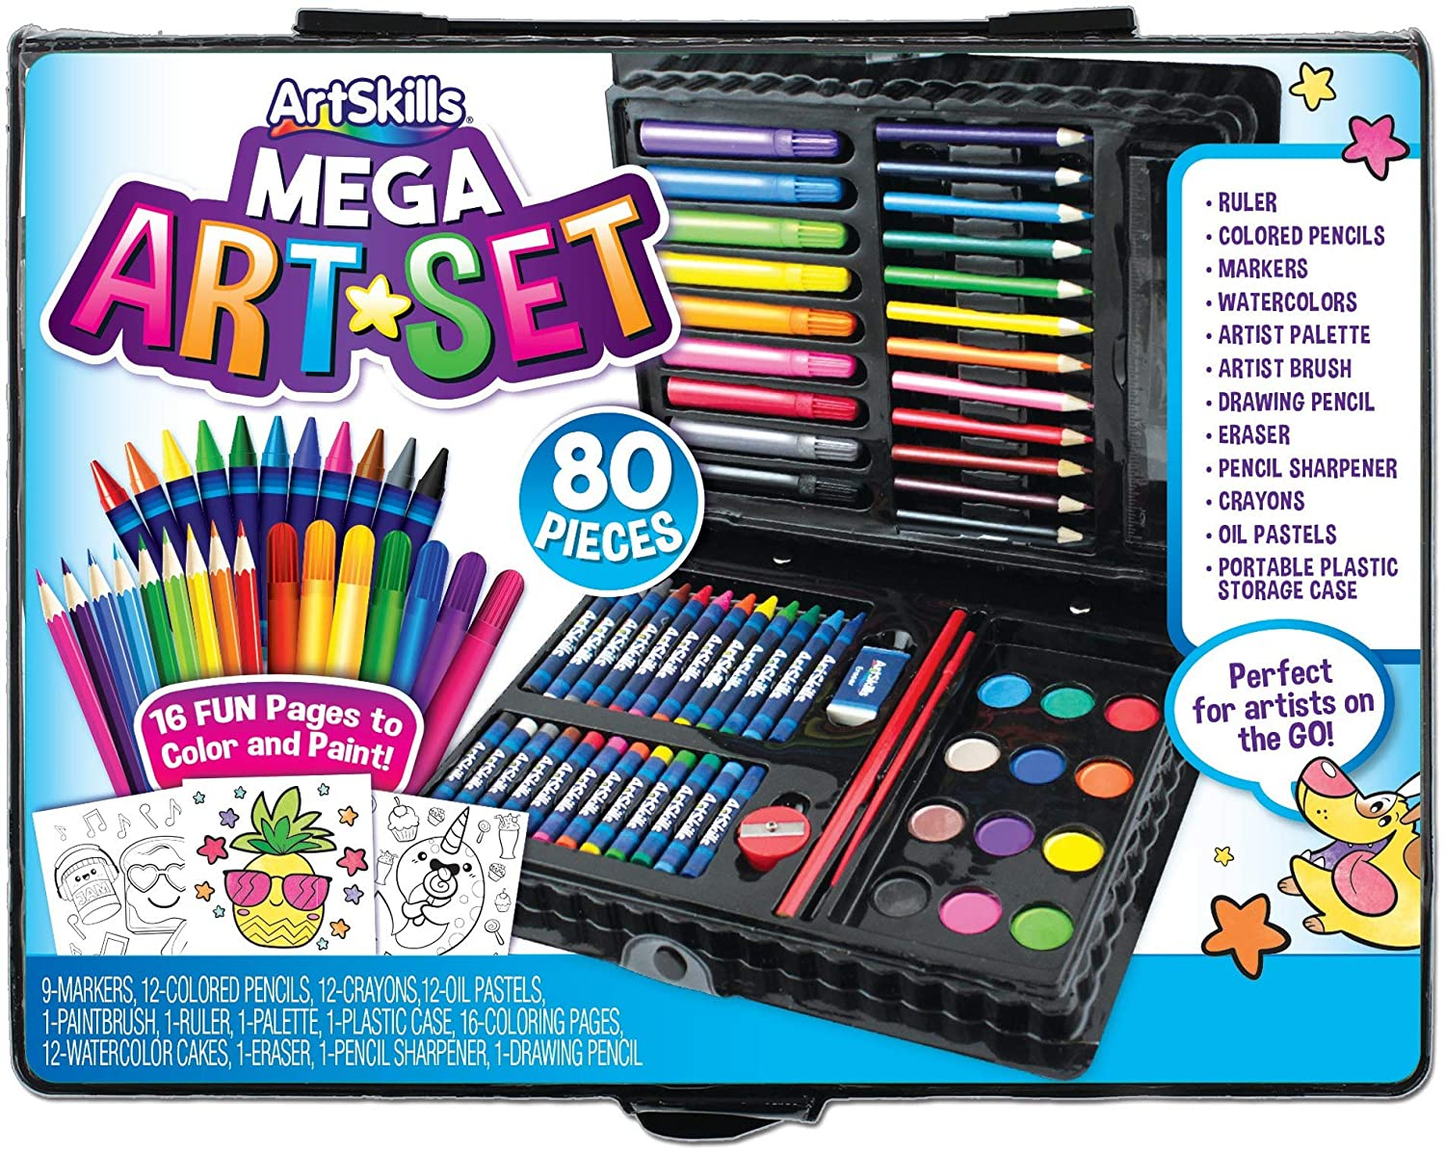 Mega Art Set, Arts and Crafts Supplies, Includes Colored Pencils, Stencil Letters, Markers, Watercolor Paint, Crayons, 80 Pieces